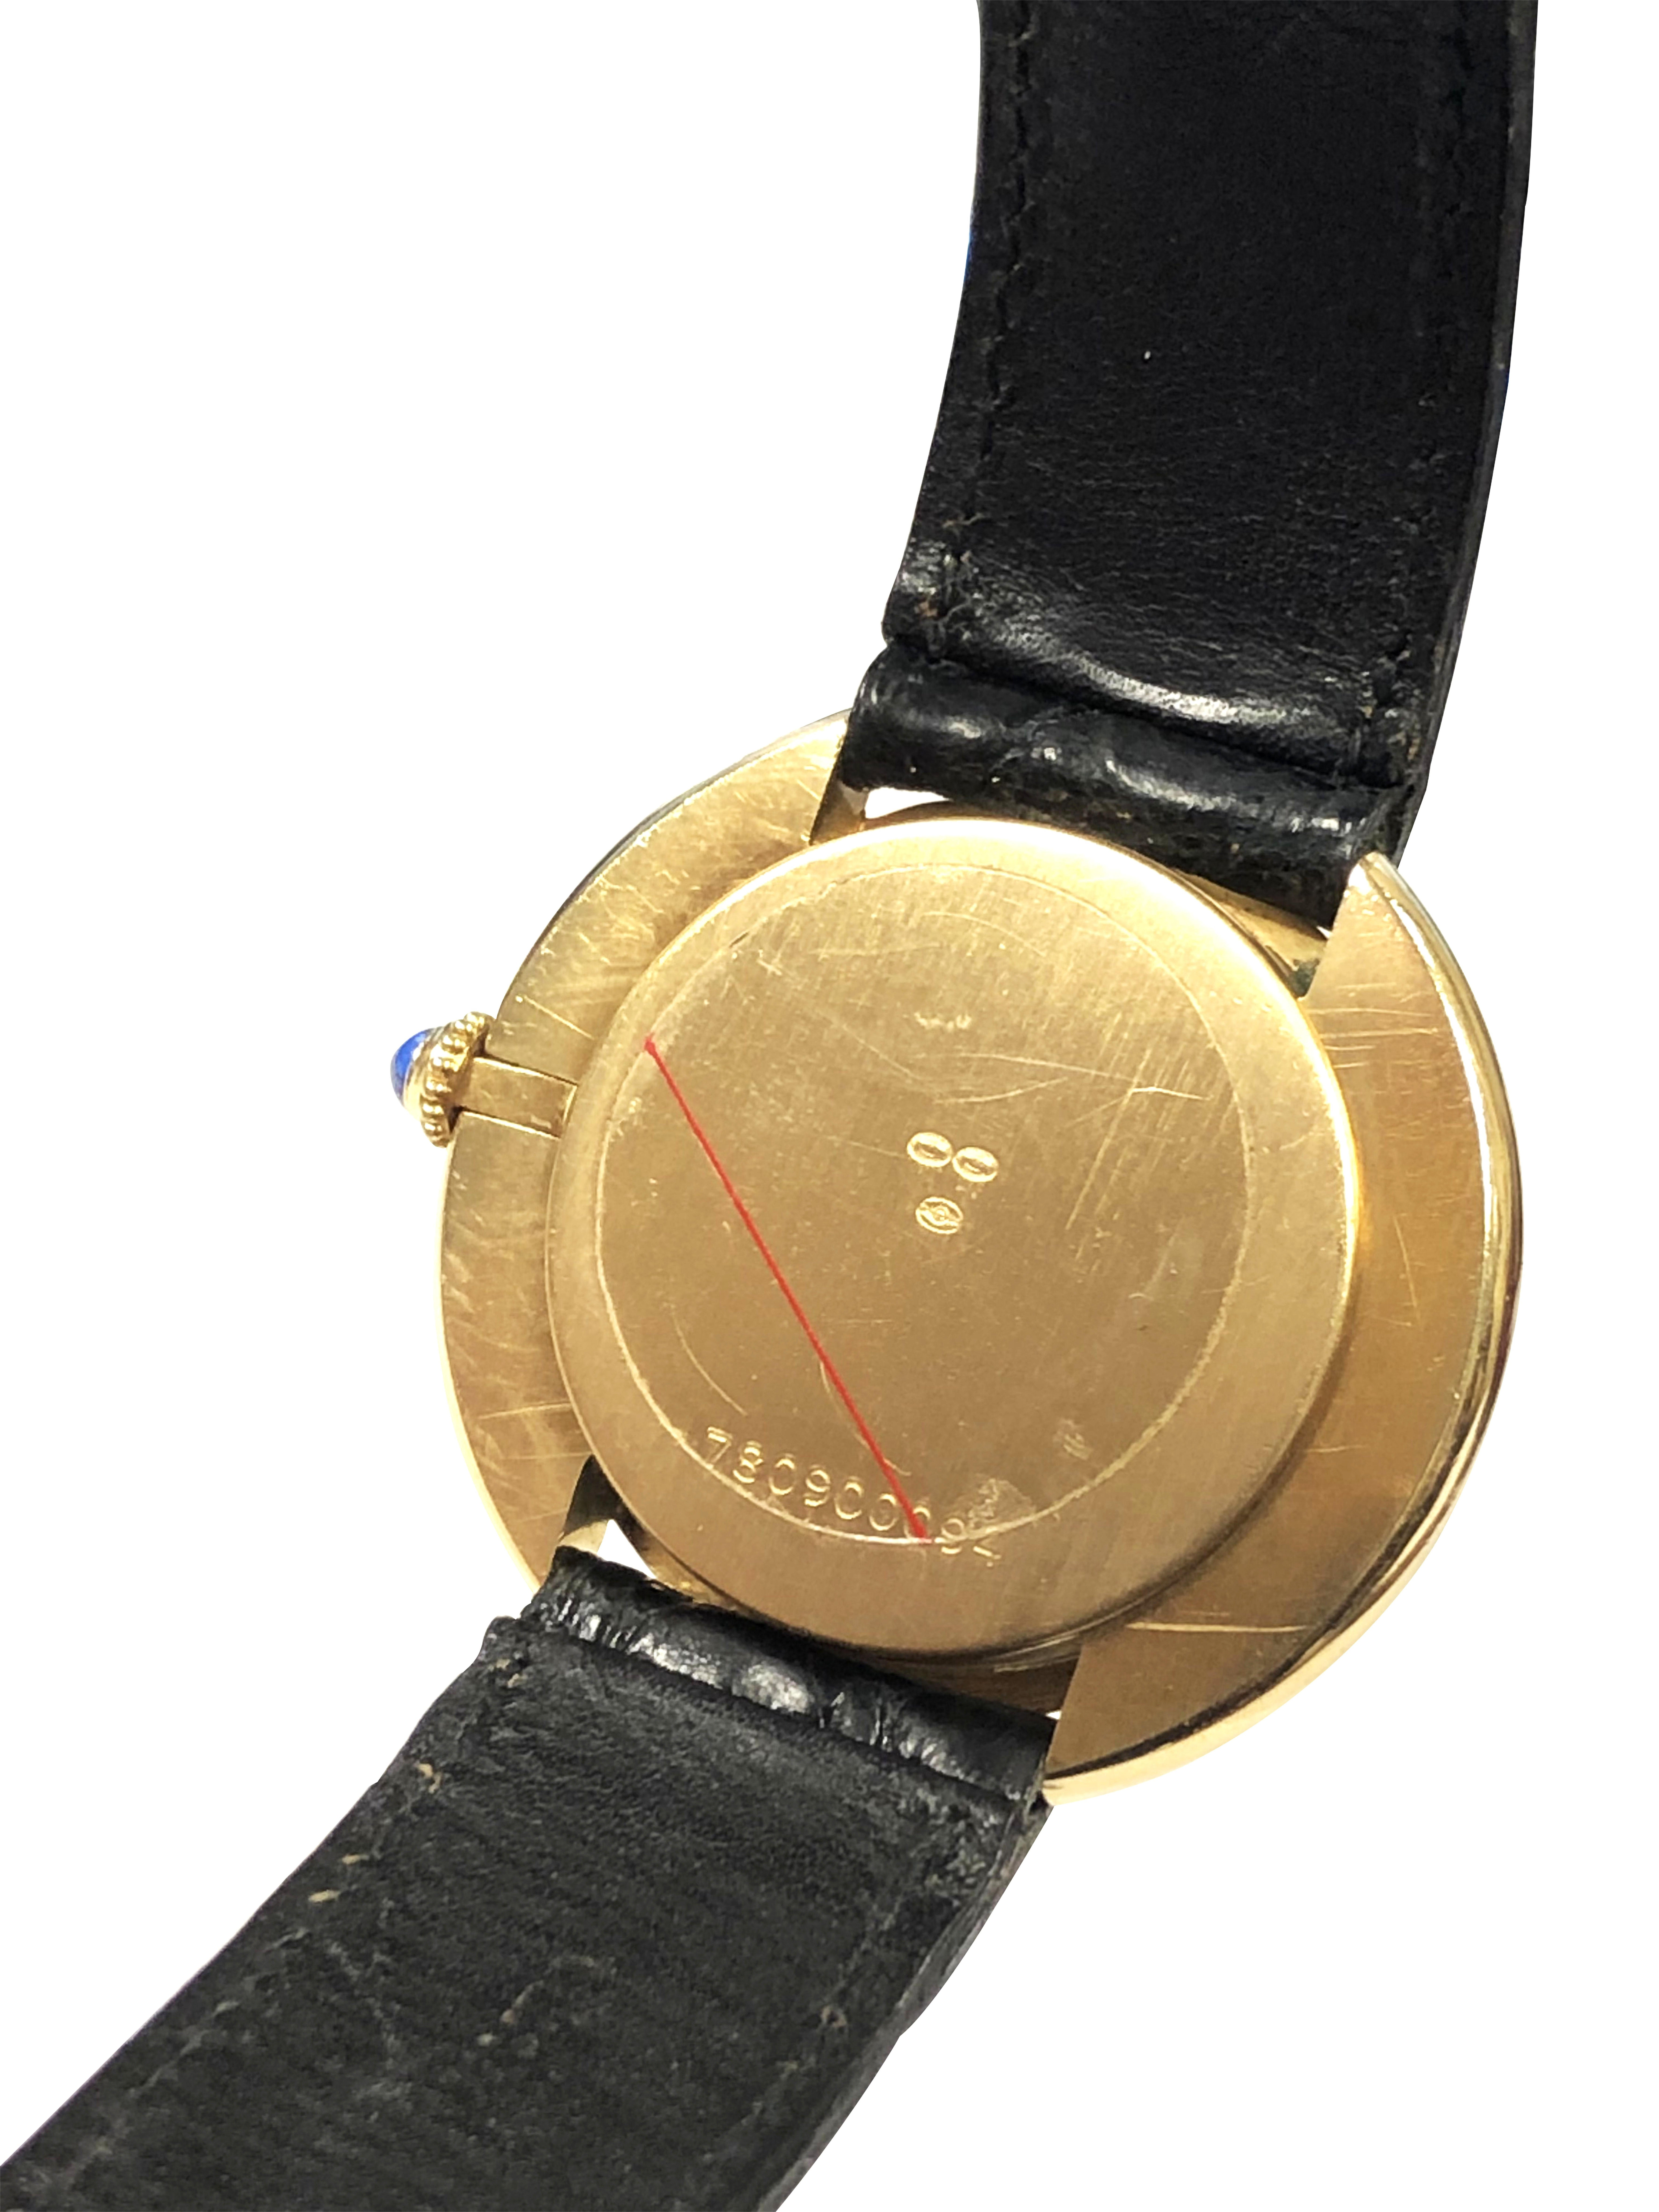 Circa late 1960s Cartier Paris Ellipse Wrist Watch, 33 X 28 M.M. 18K yellow Gold 2 Piece stepped case. Mechanical, Manual wind Movement. White Dial with Black Roman numerals. Cartier Black Croco Strap with original Cartier 18K yellow Gold Deployment